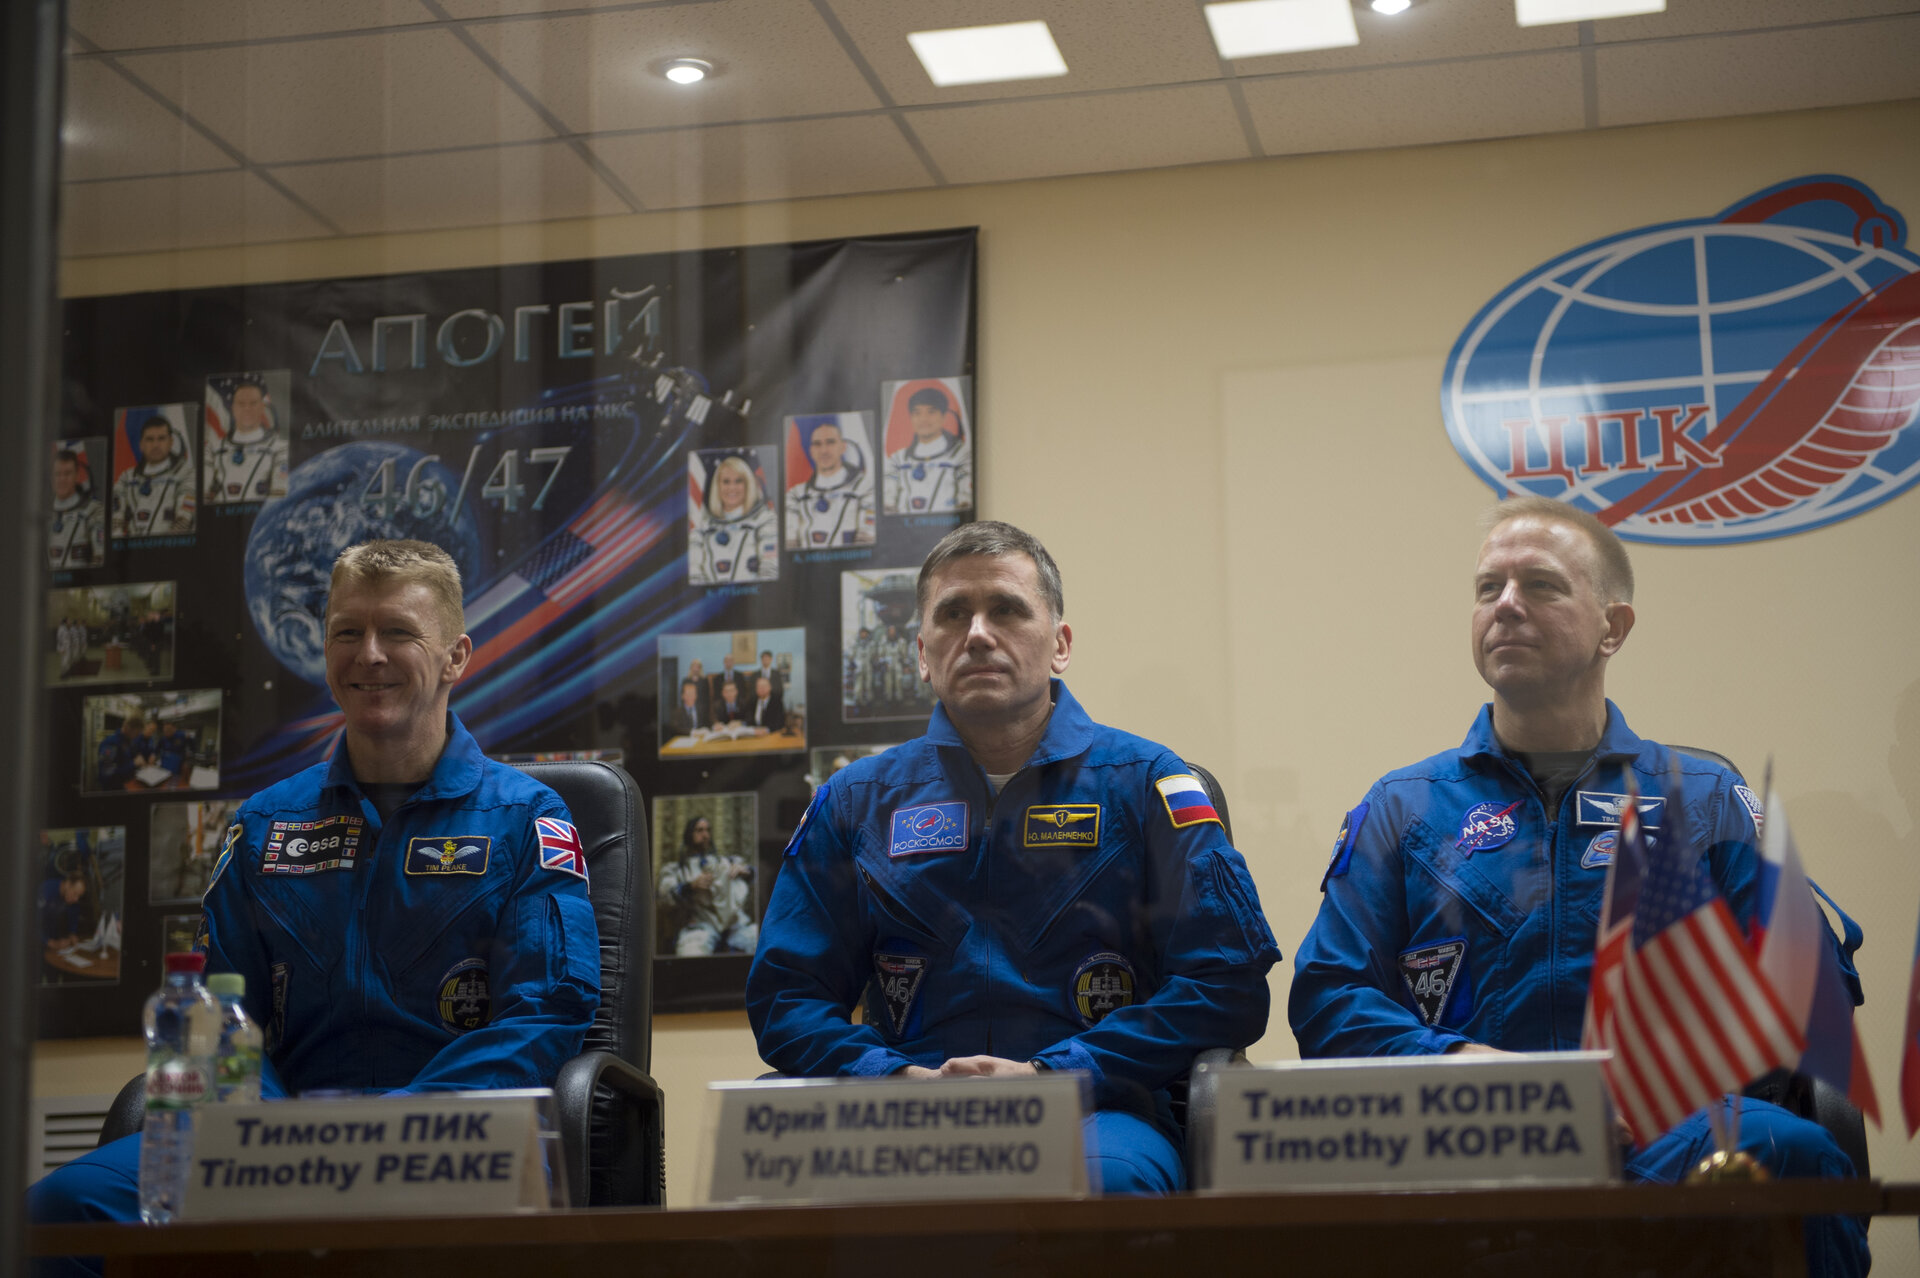 Expedition 46-47 prime crewmembers during the pre-launch press conference